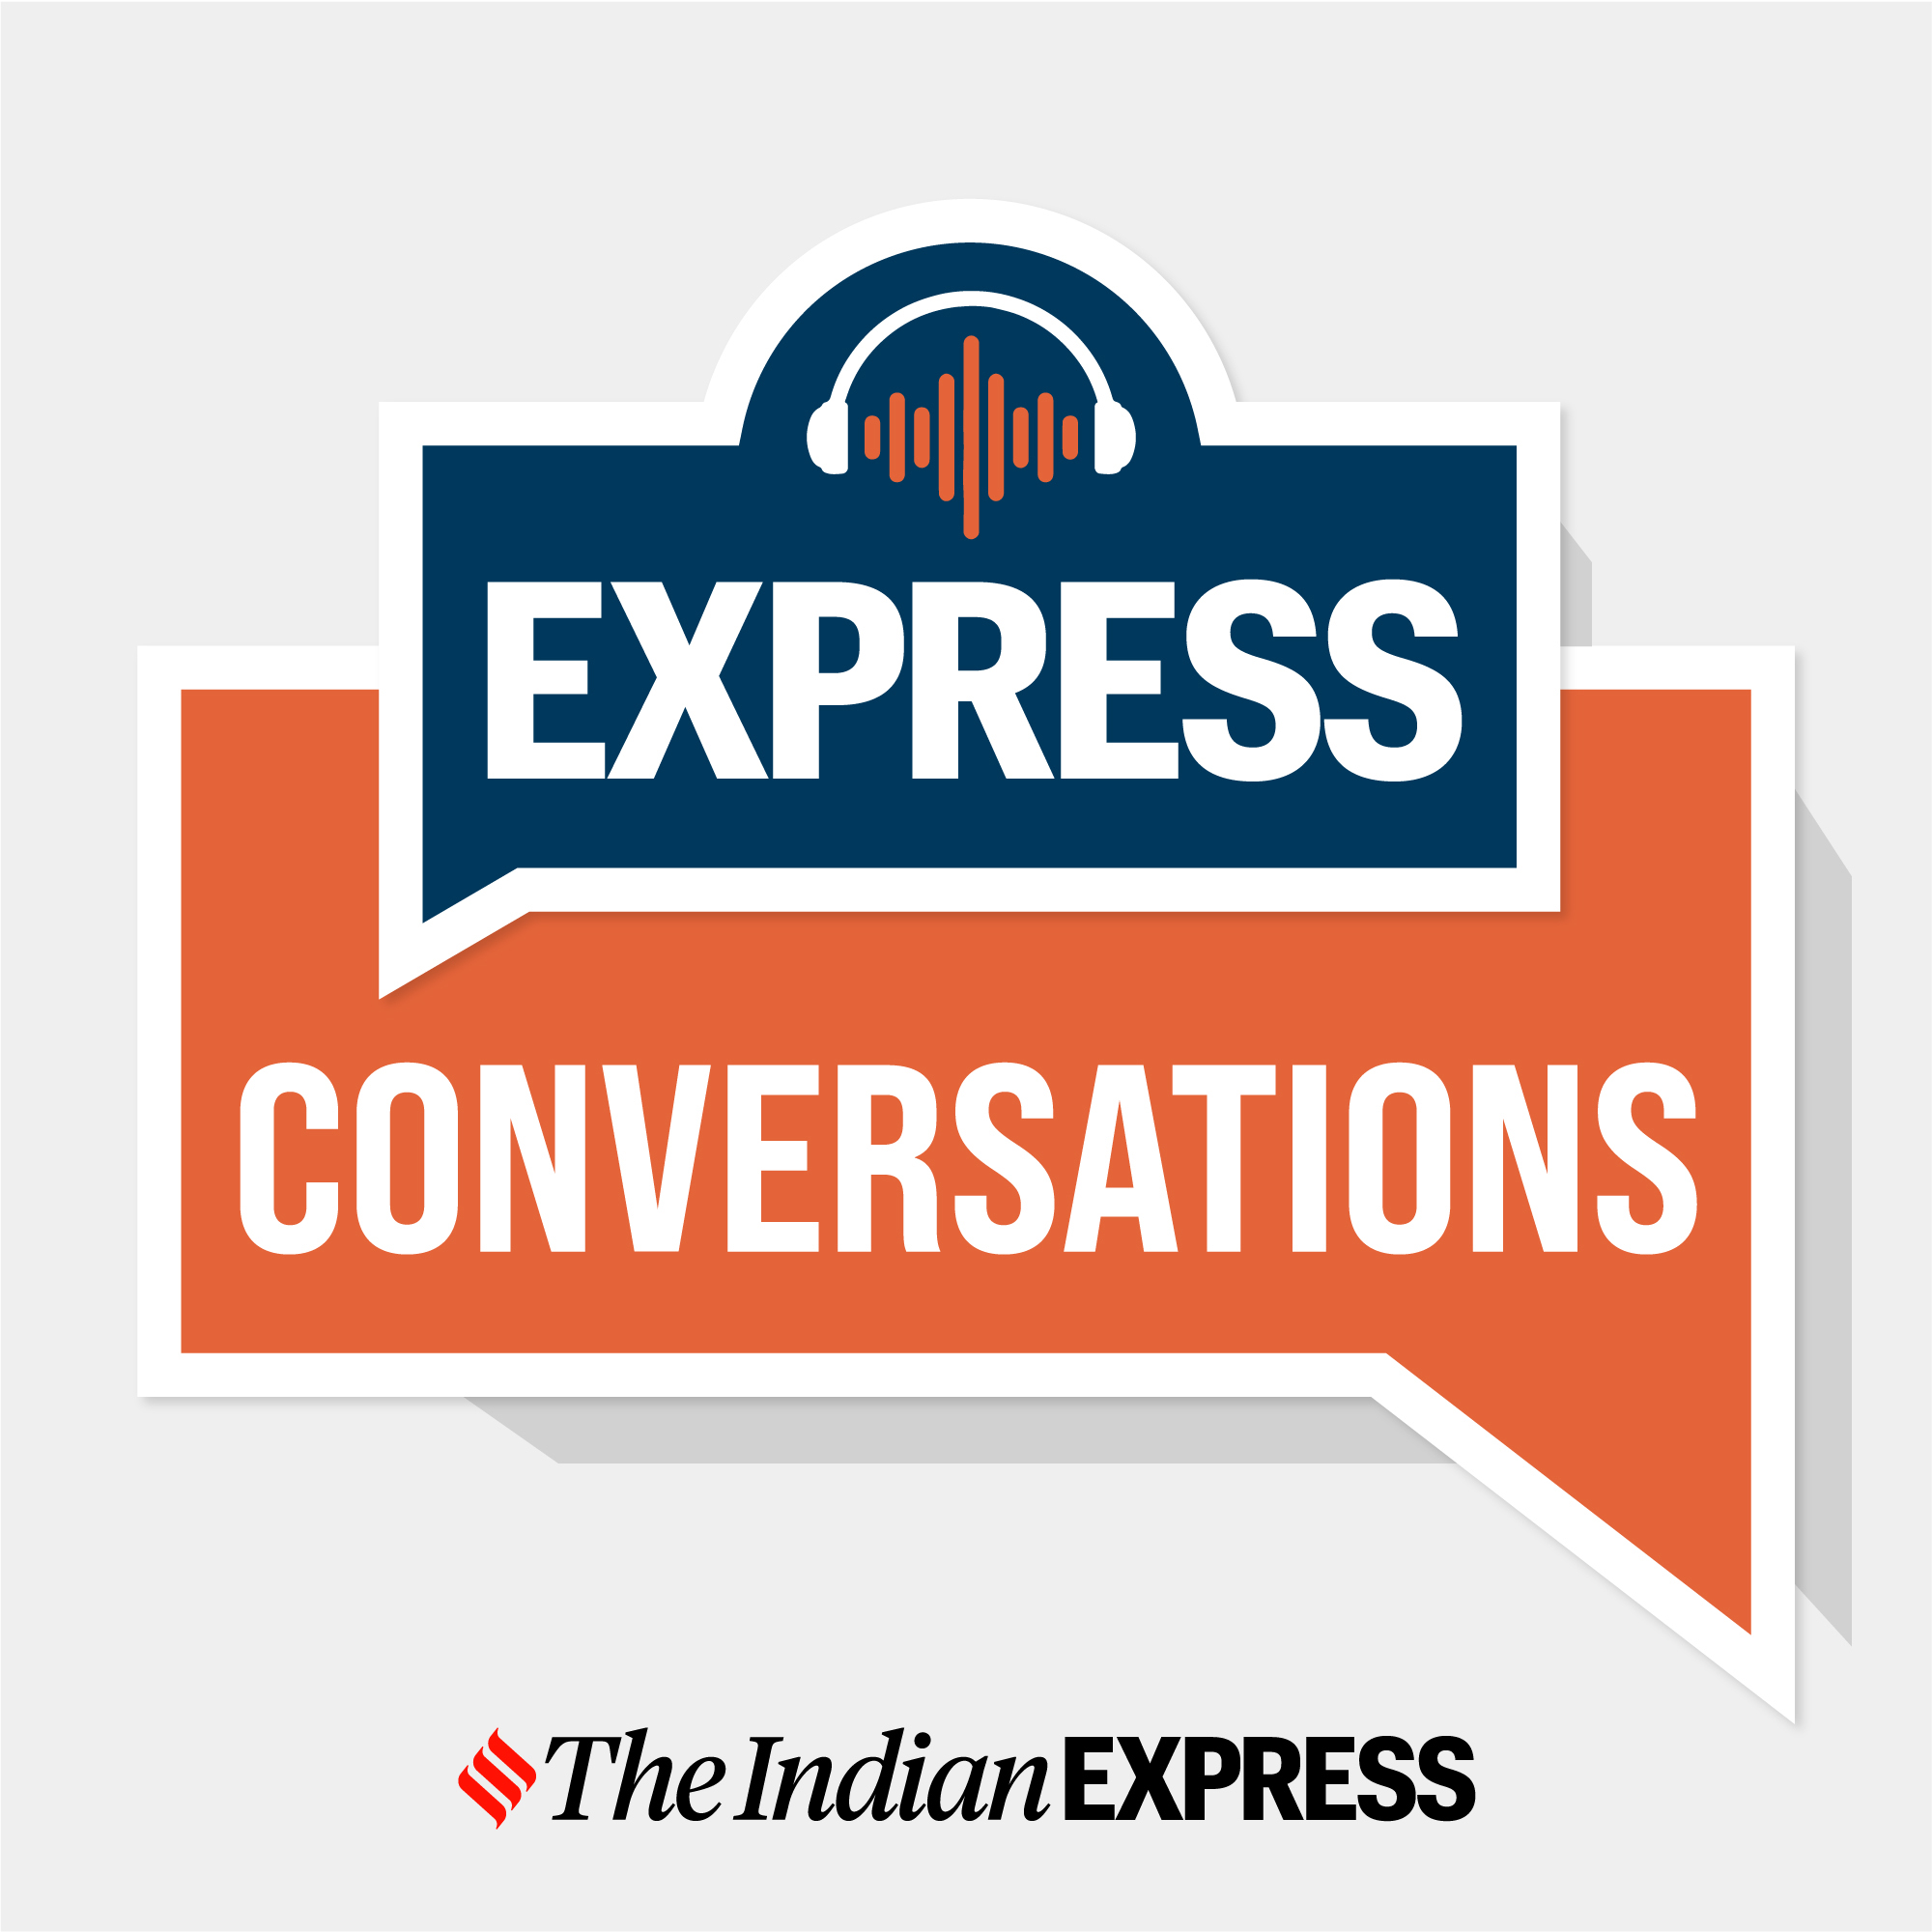 New Indian Express Group signs new multi-year deal with Comscore